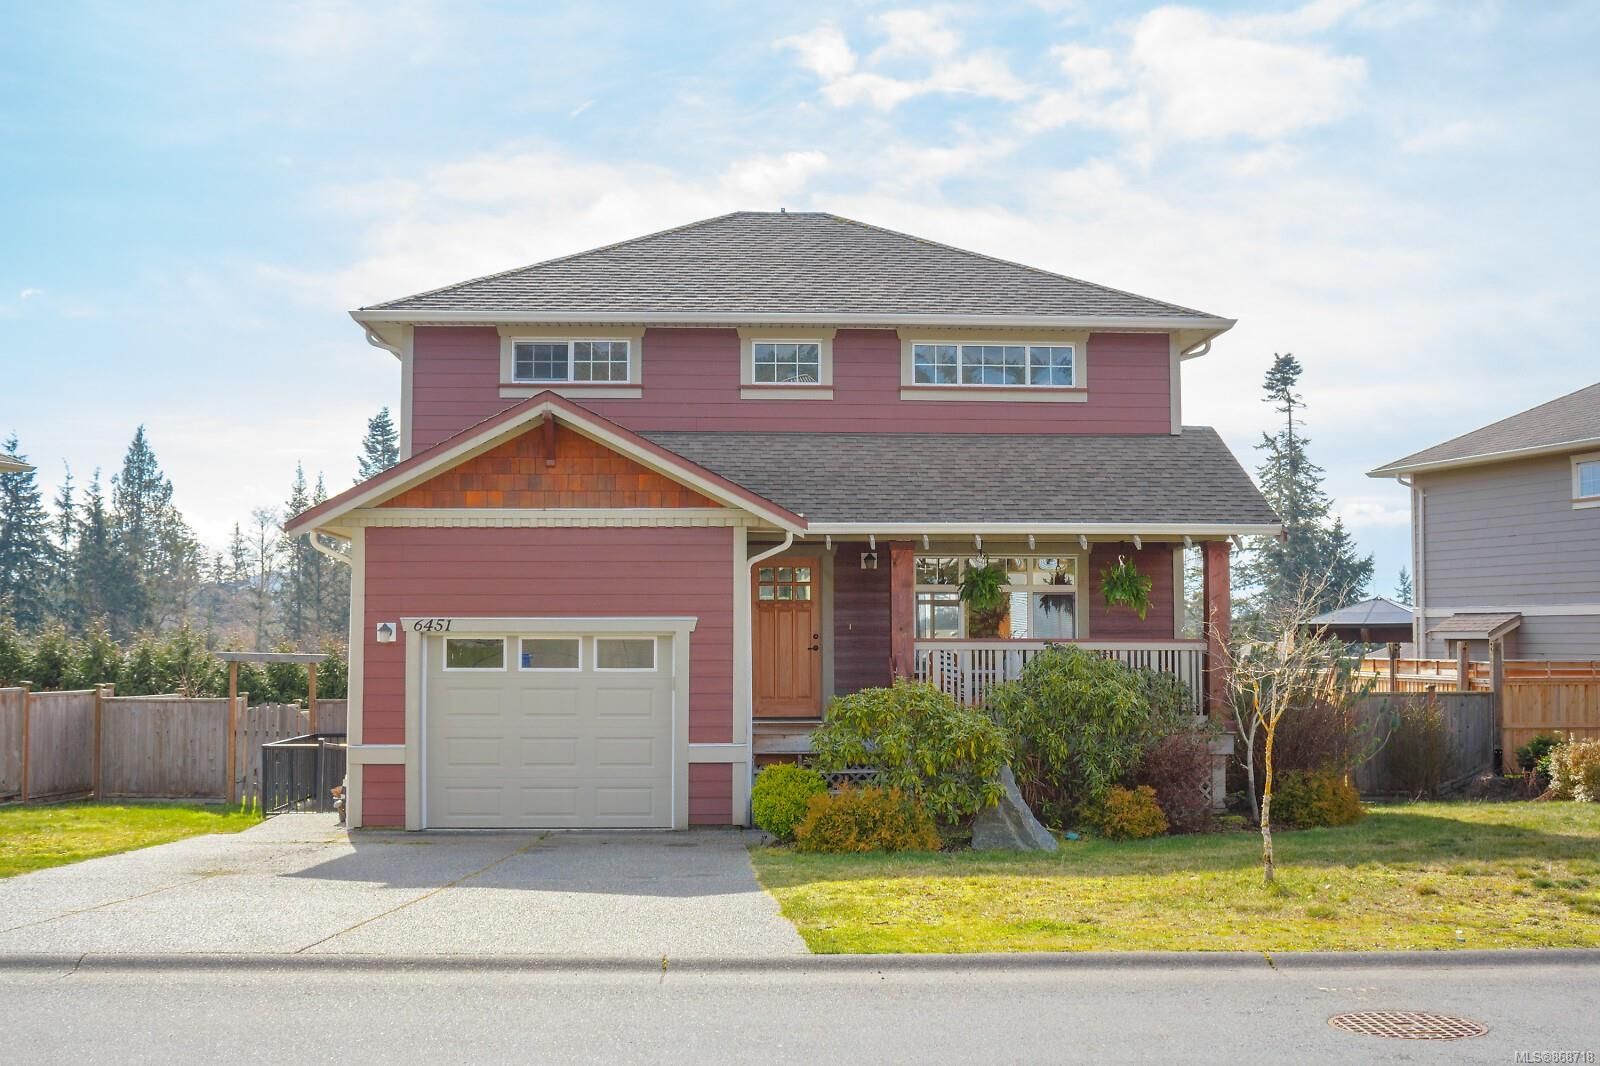 Main Photo: 6451 Willowpark Way in Sooke: Sk Sunriver House for sale : MLS®# 868718